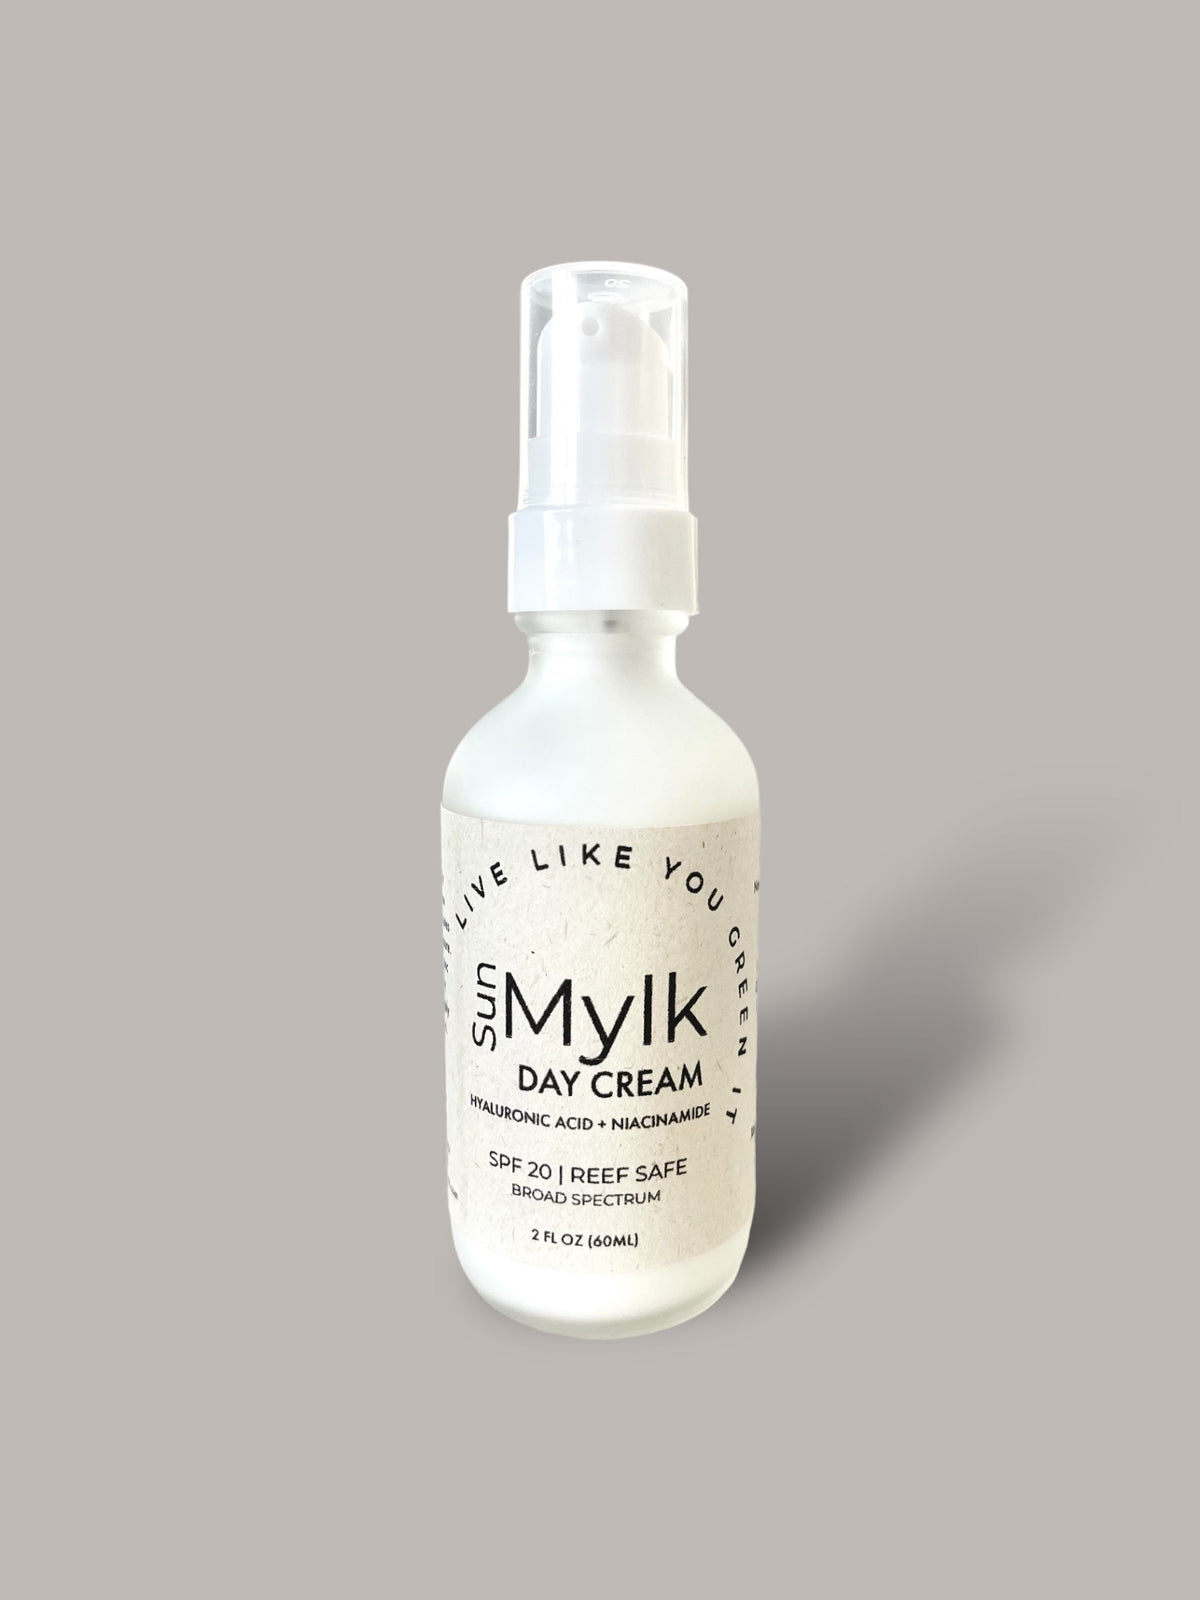 Sunscreen, Sun Mylk Day Cream with Mineral Reef-Safe SPF